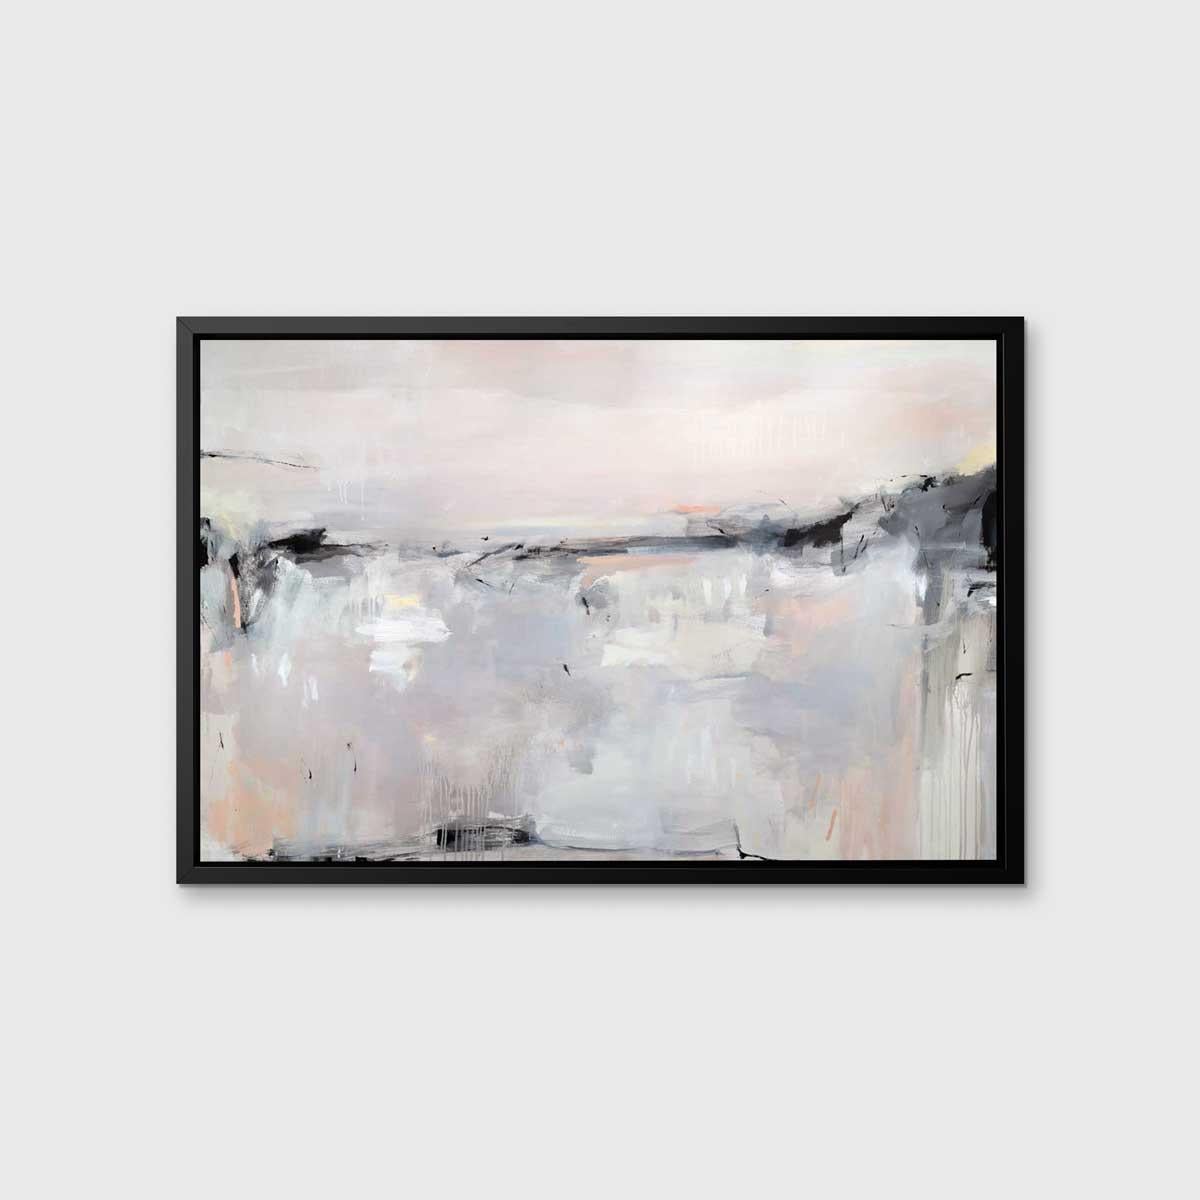 This contemporary abstract Limited Edition giclee print by Kelly Rossetti is made with acrylic paint on canvas. It features a light, warm, and neutral palette, with grey, white, and pink tones contrasted by deep charcoal black, with a loose,